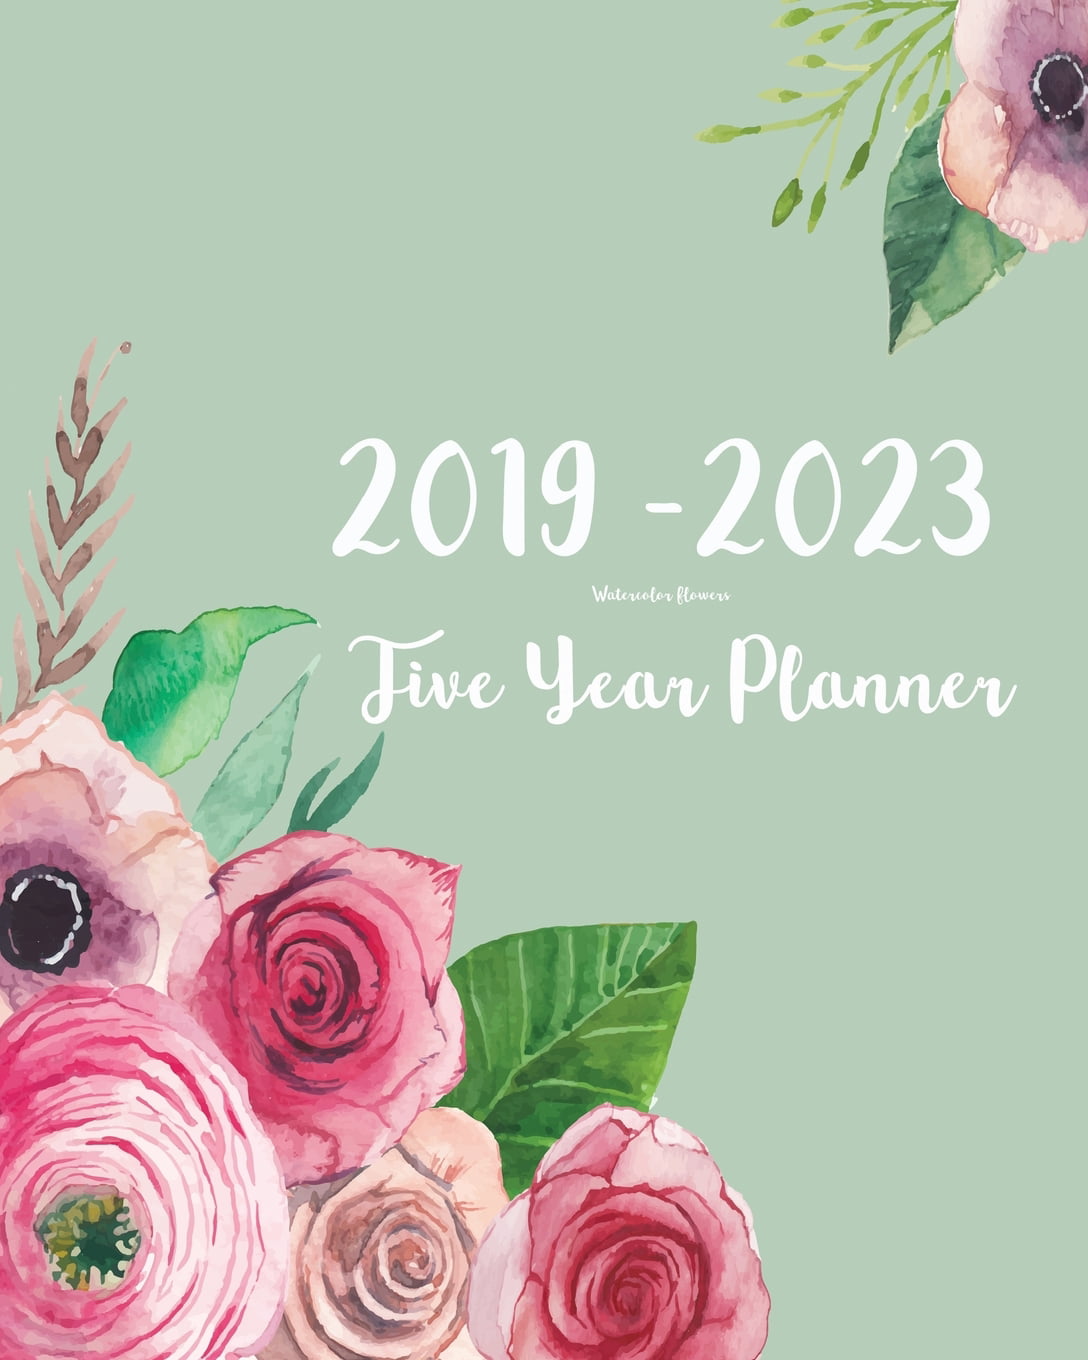 Appointment Notebook Agenda Planner and Schedule Organizer Academic Student Planner for the next five years Journal Planner and Logbook 5 year calendar/ 2019-2023 Five Year Planner- Blue Flowers: 60 Months Planner and Calendar,Monthly Calendar Planner 